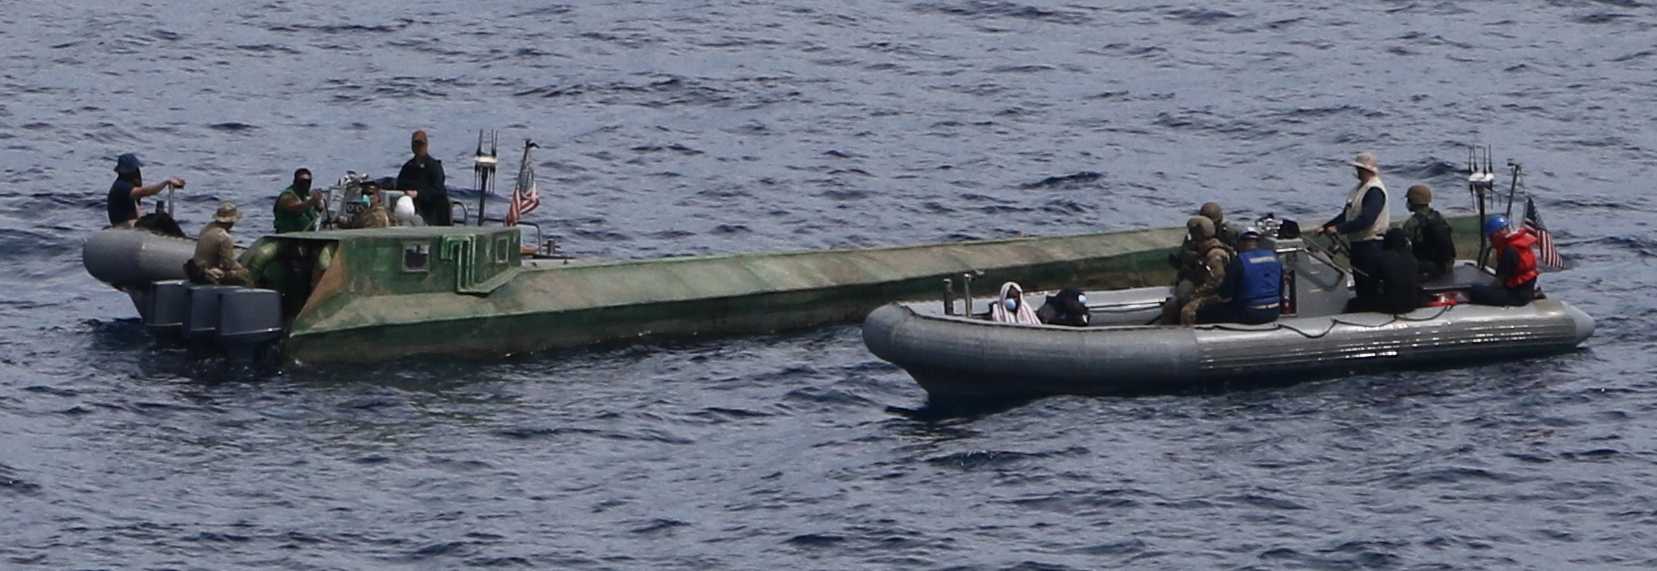 USS Preble with 100 bales of cocaine from a low-profile go-fast vessel in the eastern Pacific